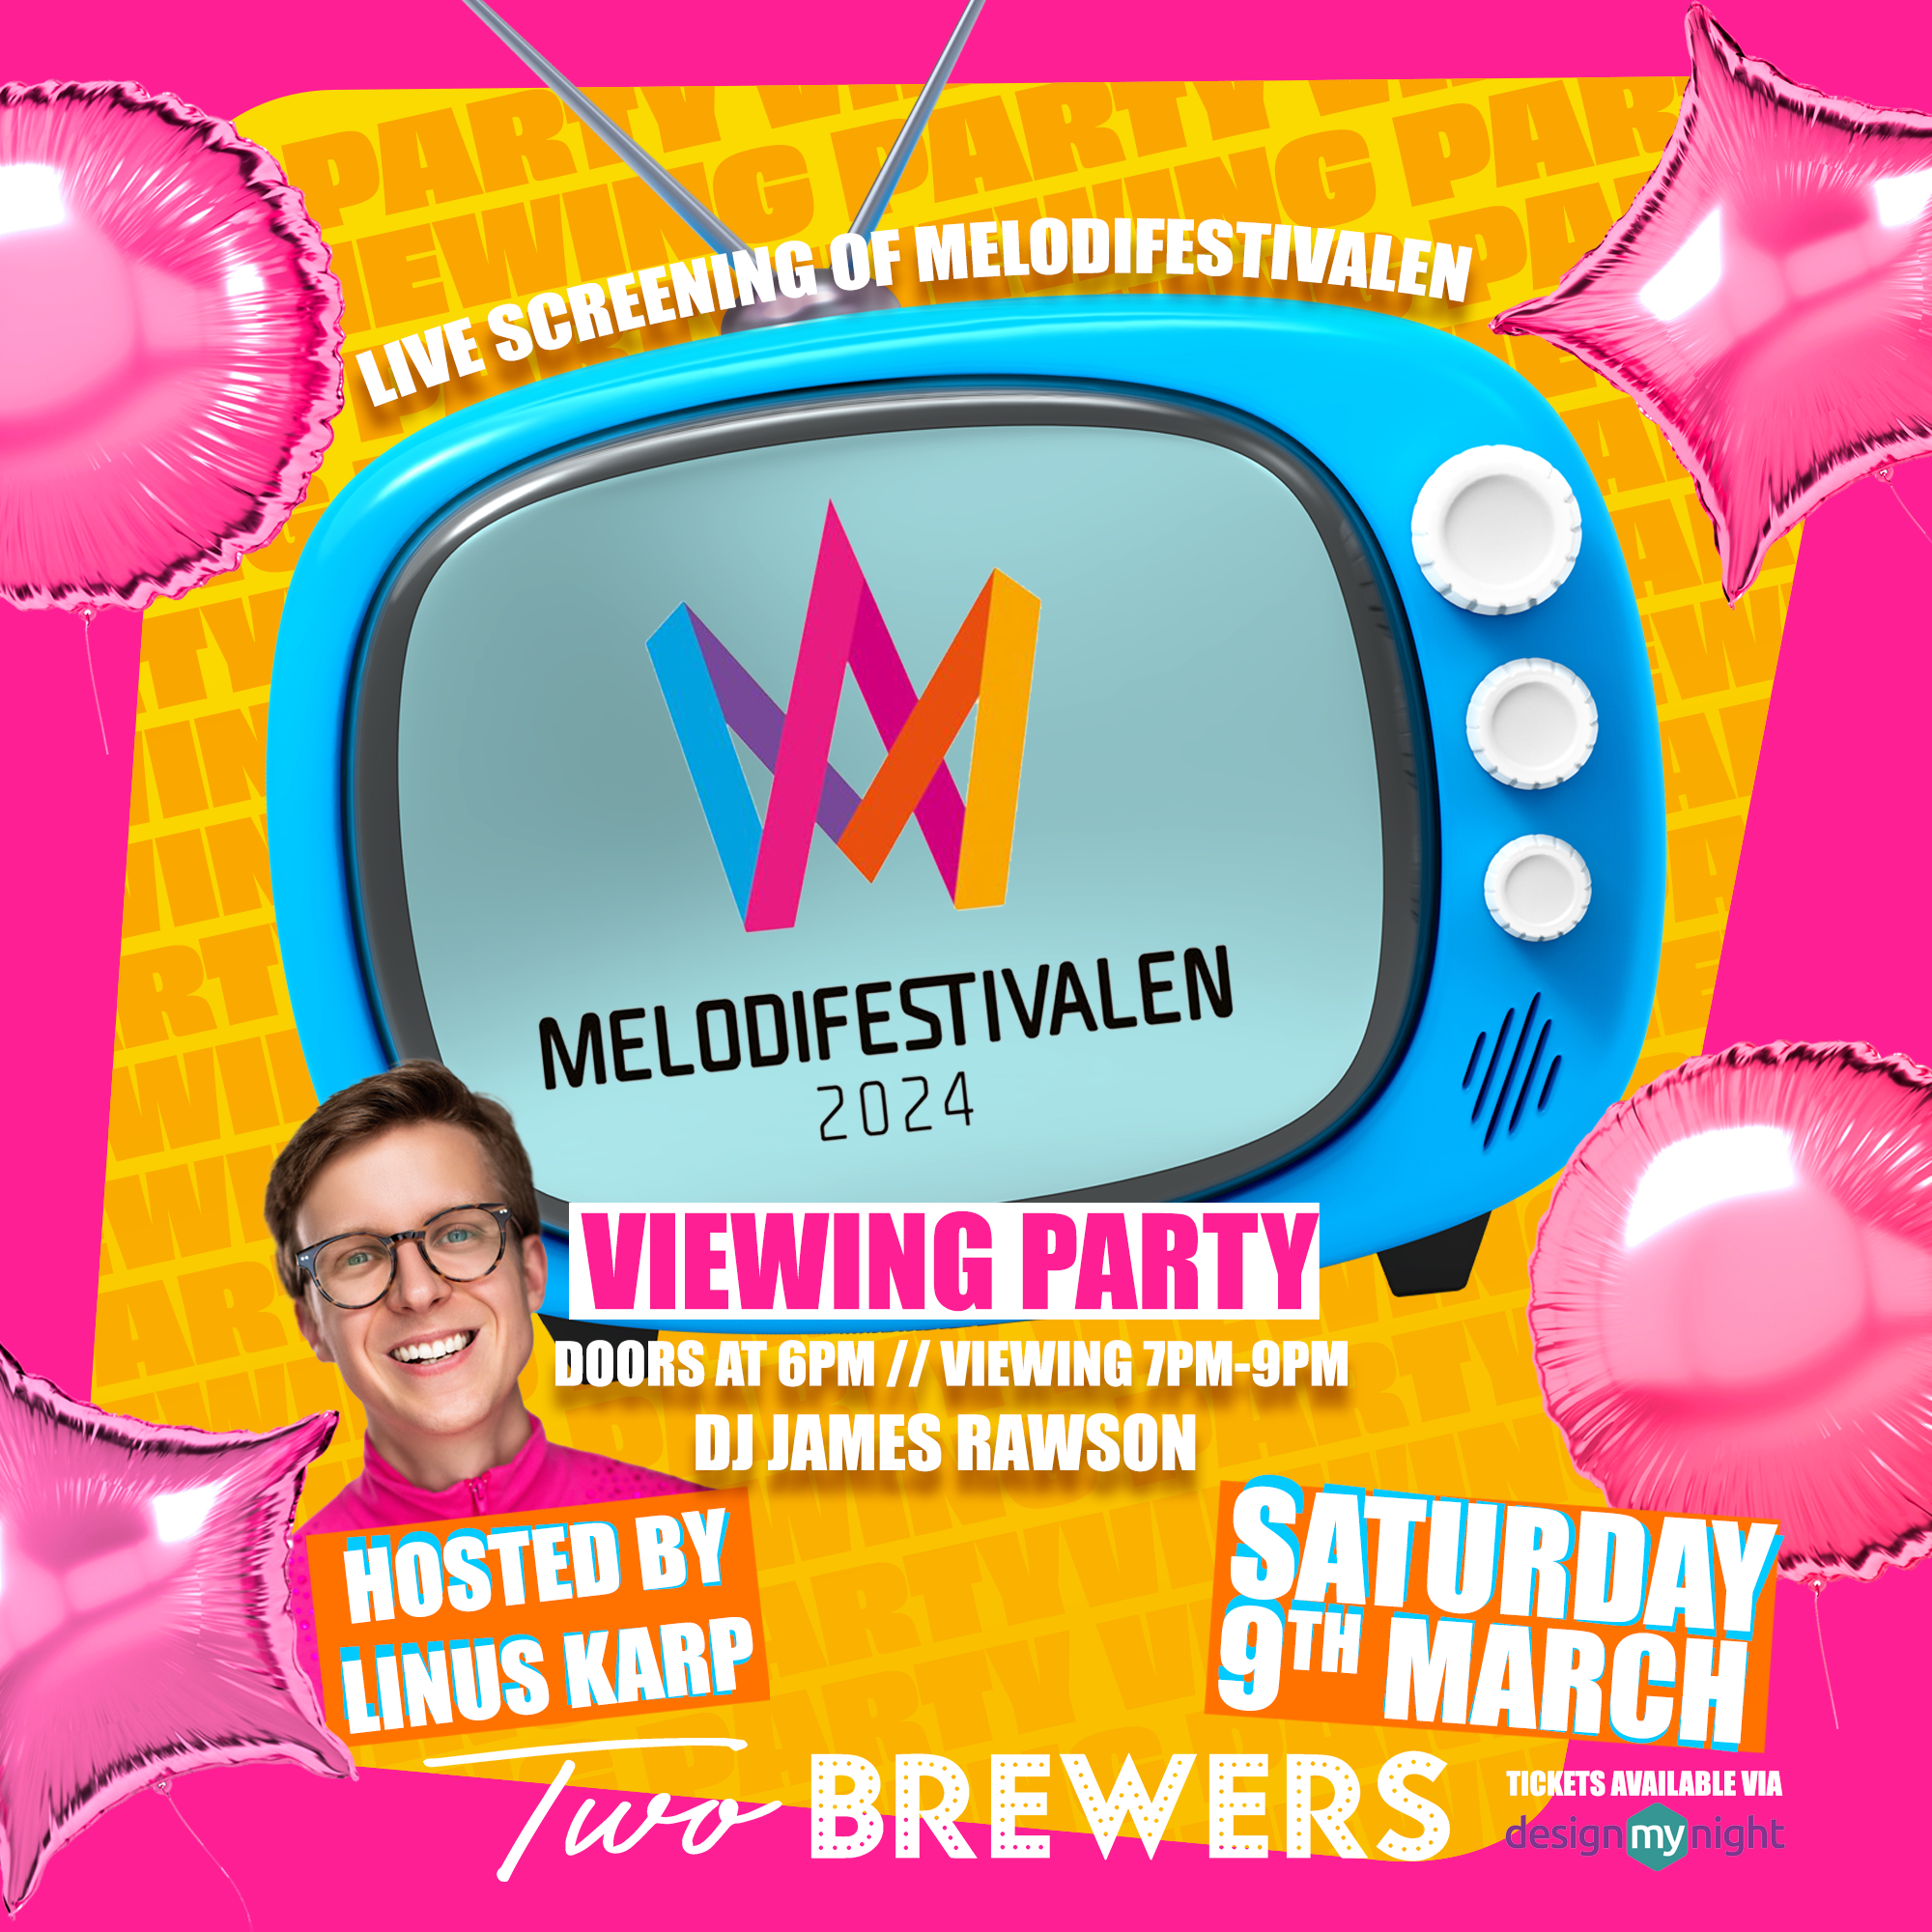 The Melodifestivalen returns to The Two Brewers in London